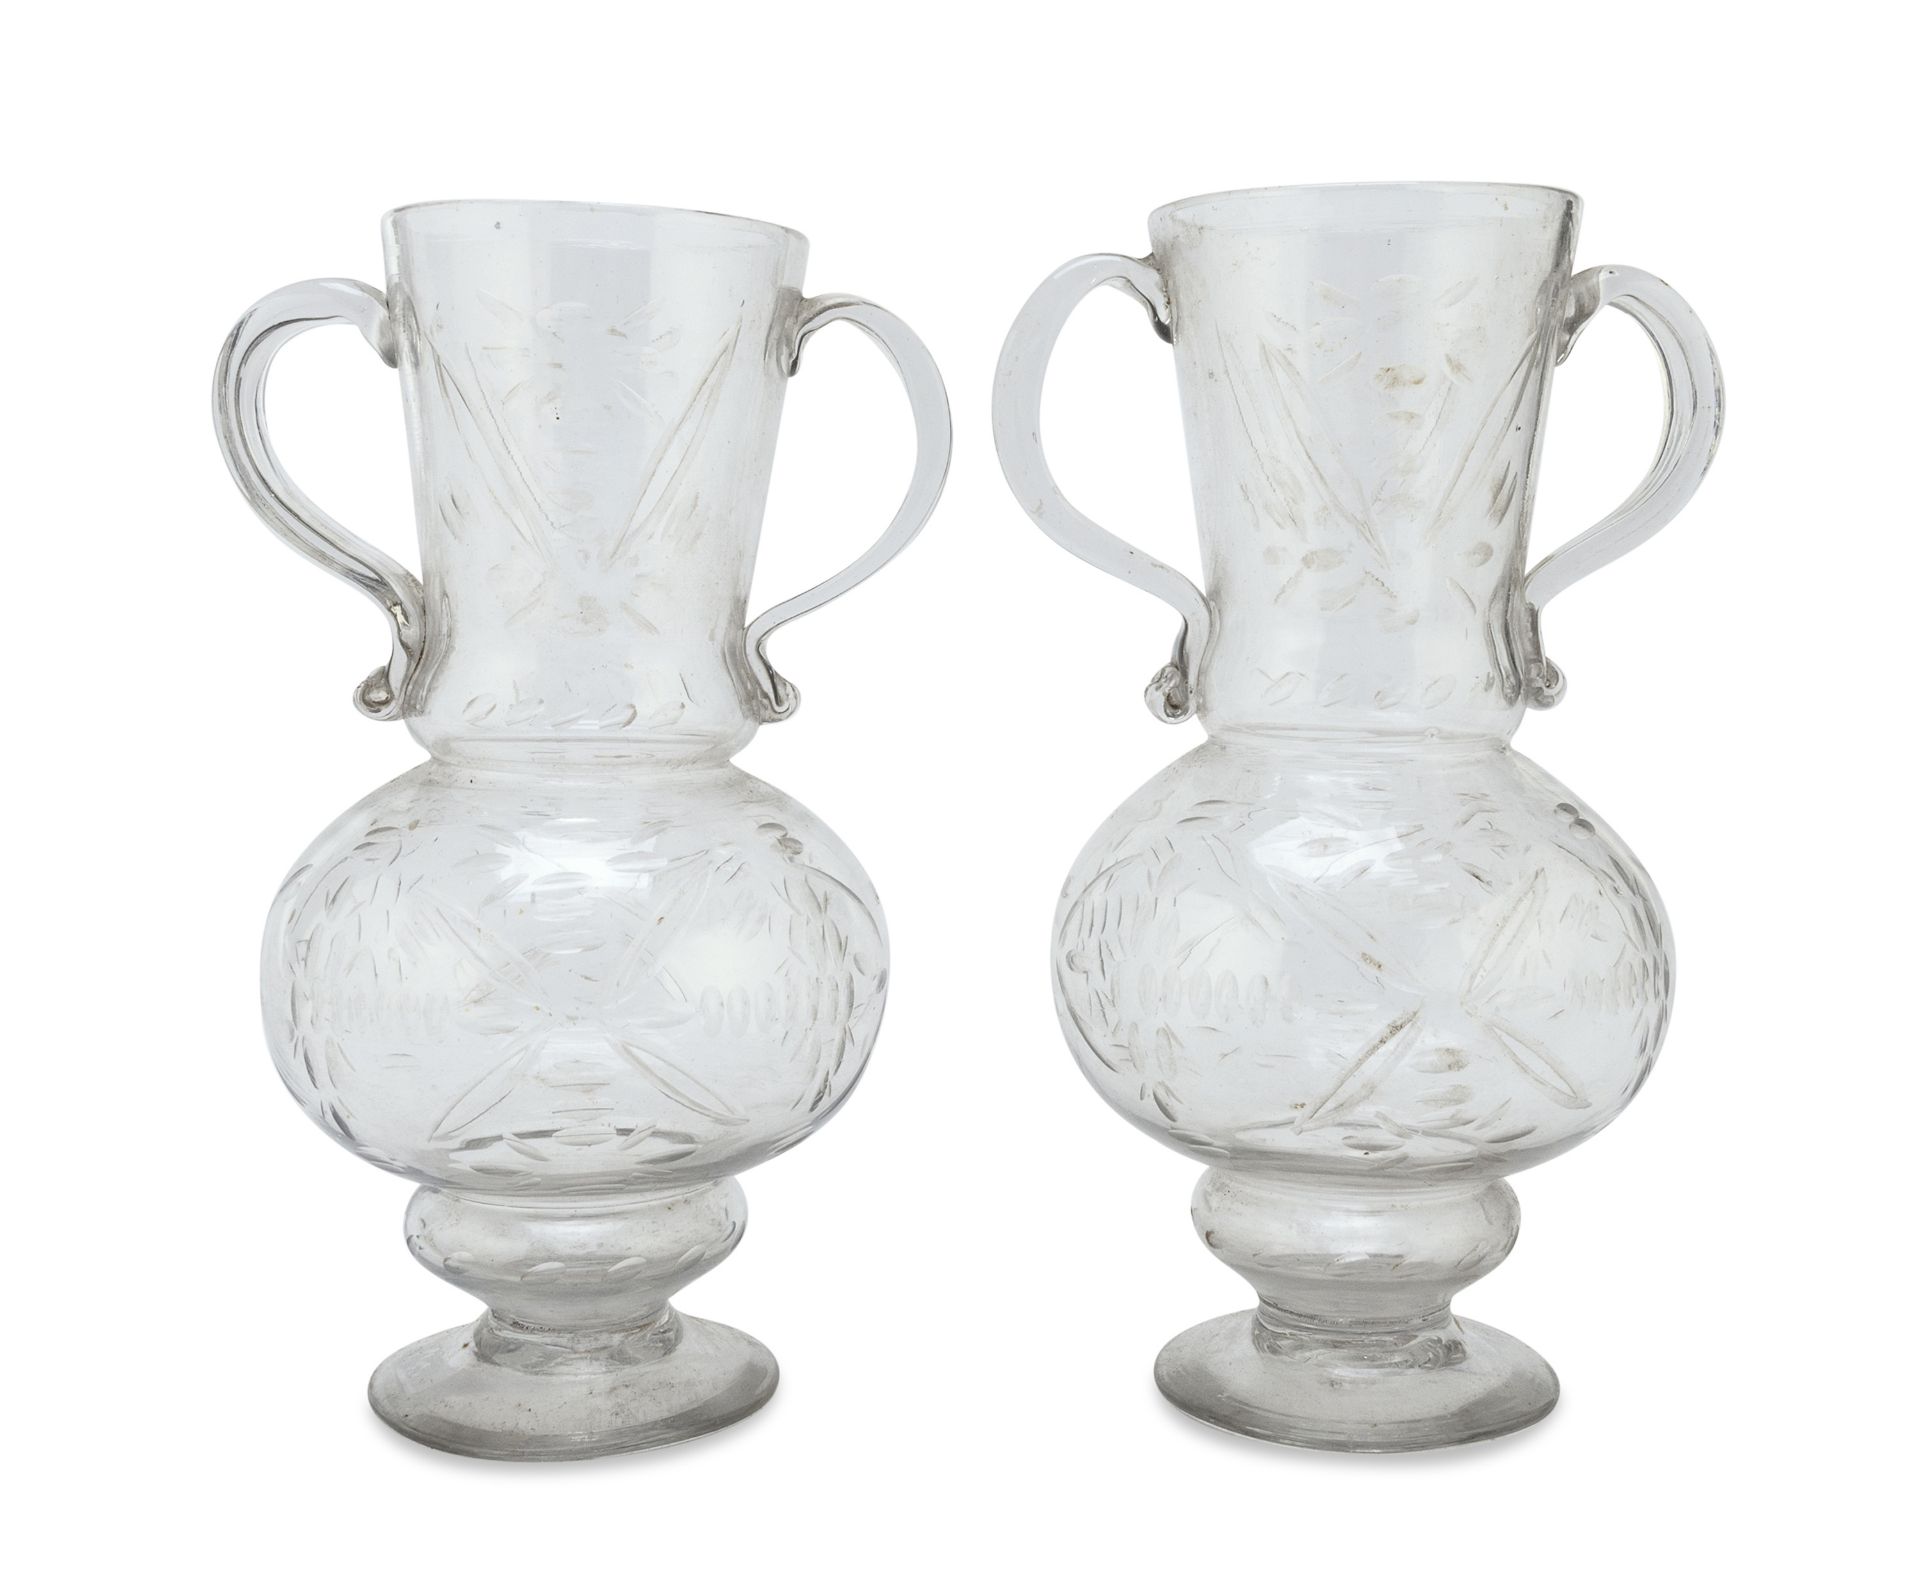 PAIR OF BLOWN GLASS JUGS EARLY 20TH CENTURY